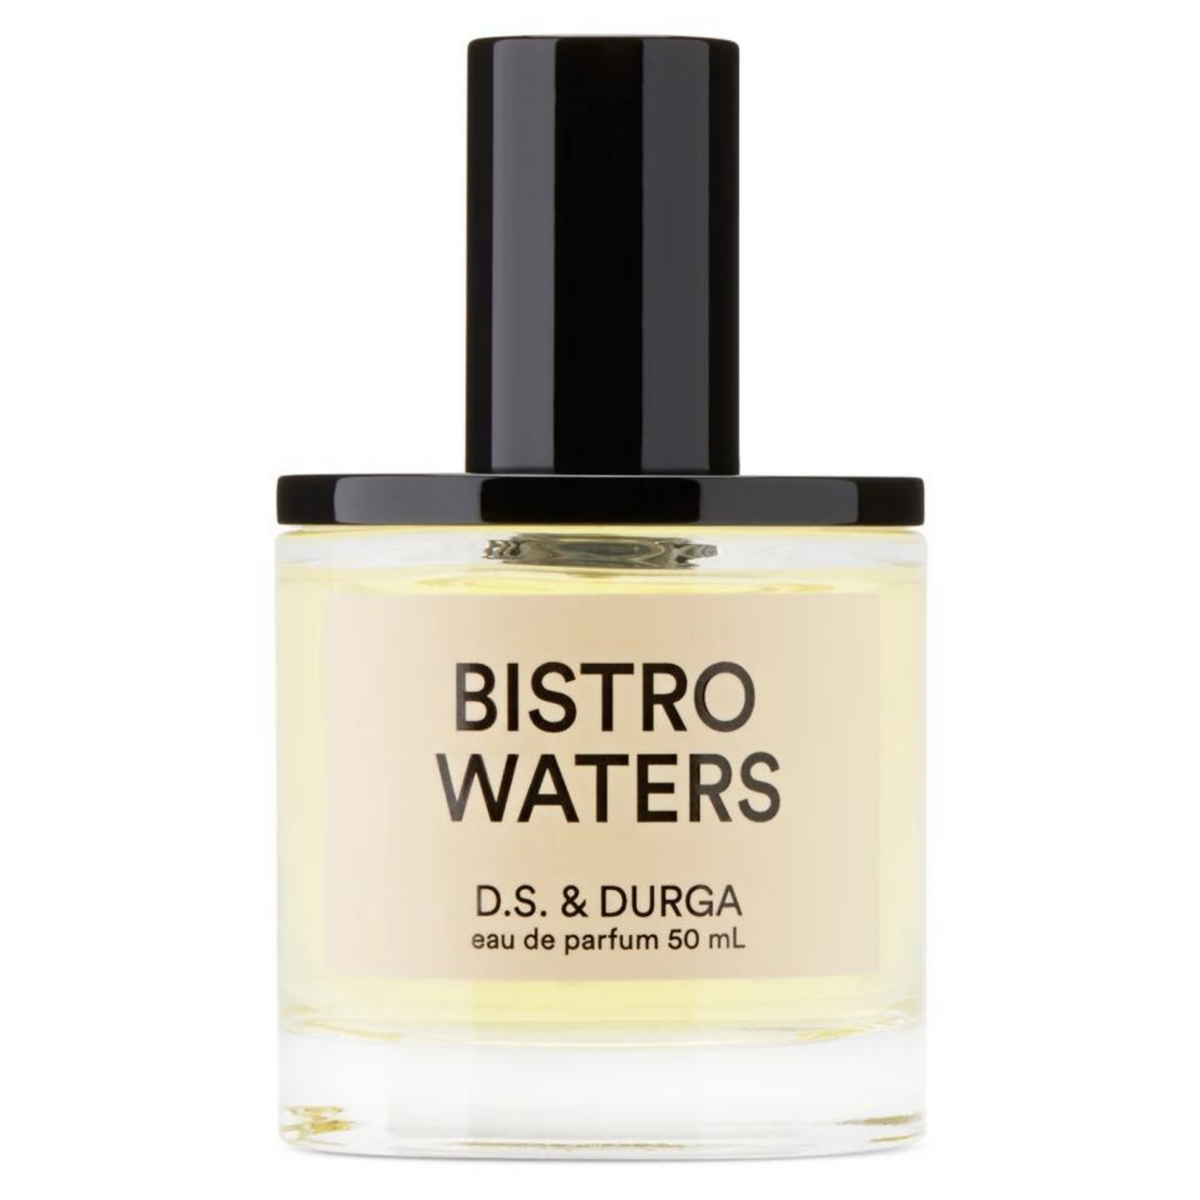 Primary Image of Bistro Waters EDP 50ml